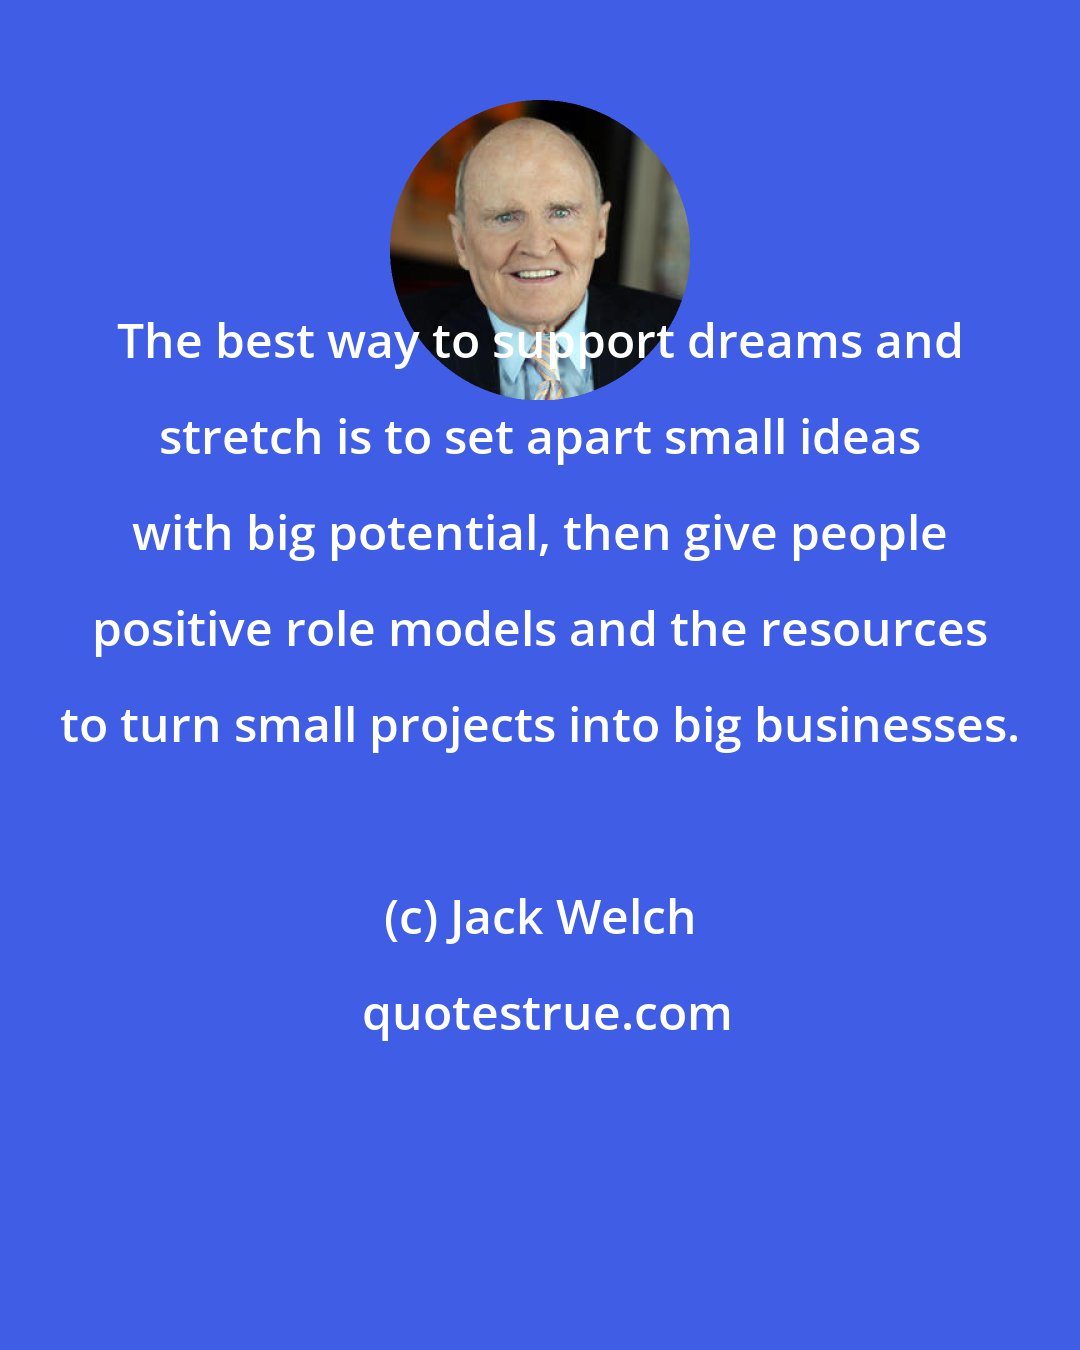 Jack Welch: The best way to support dreams and stretch is to set apart small ideas with big potential, then give people positive role models and the resources to turn small projects into big businesses.